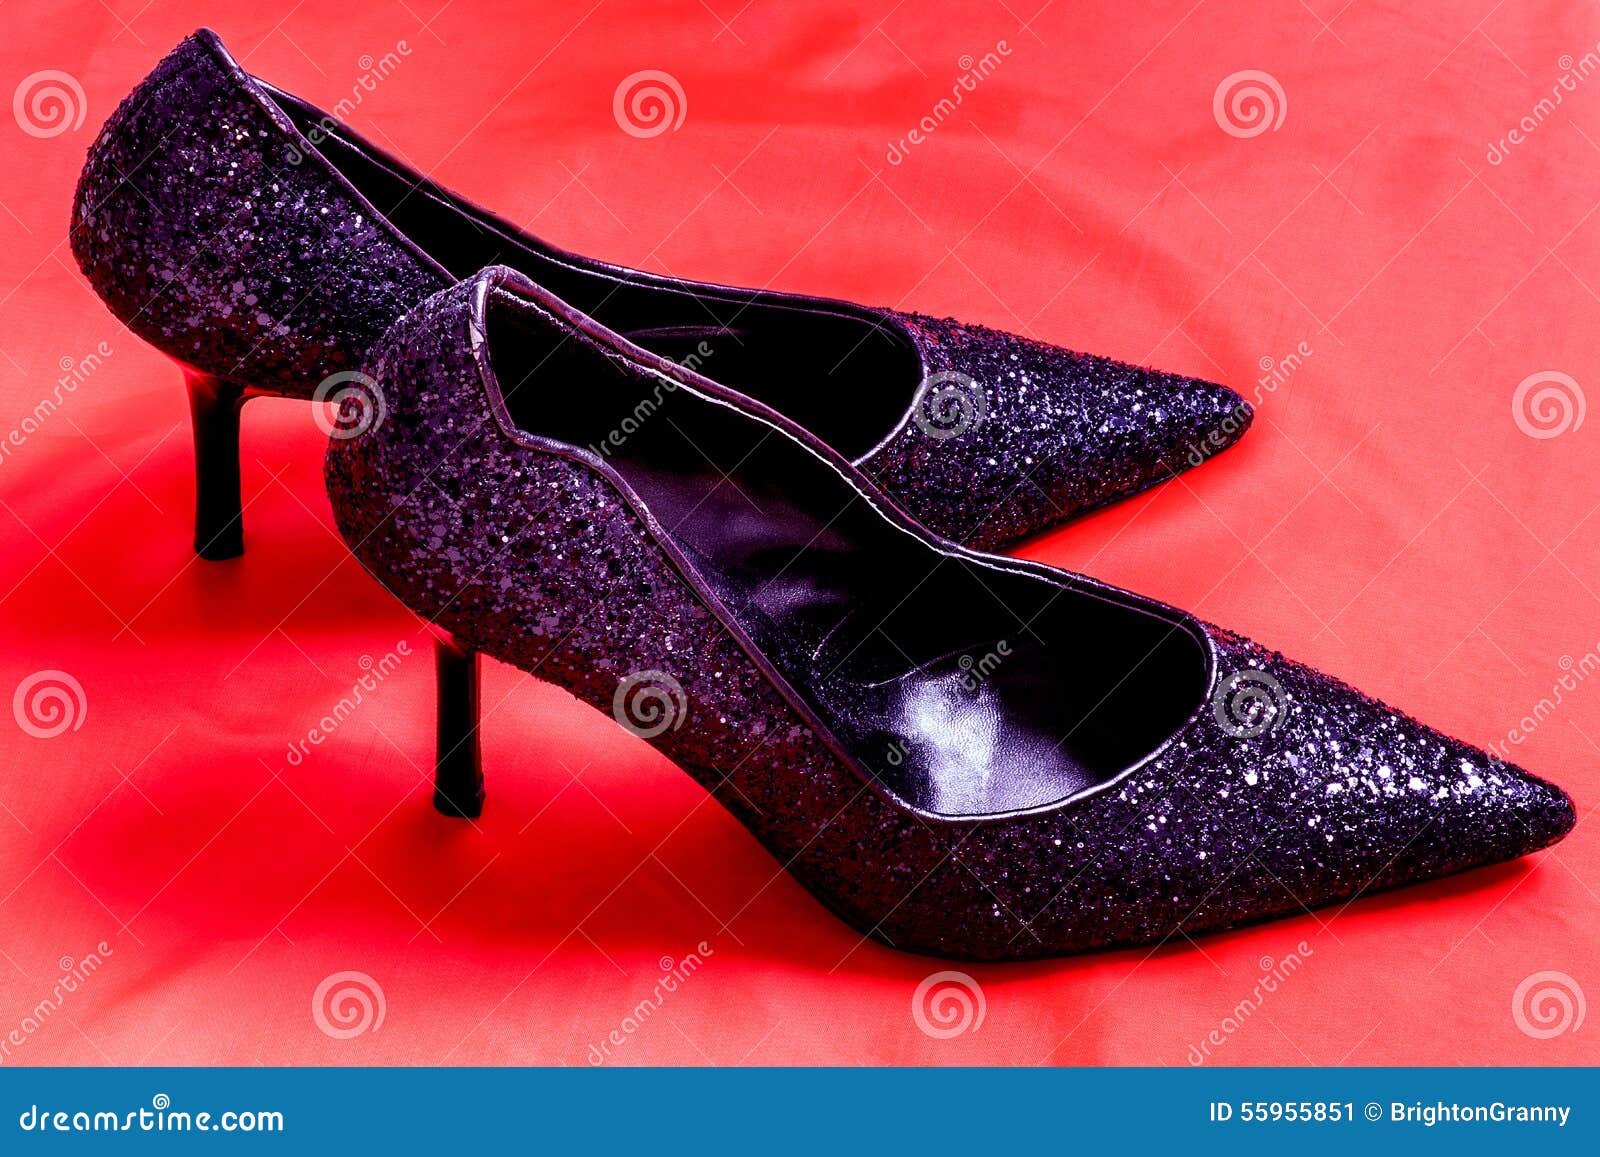 Sparkly shoes stock image. Image of glamour, beautiful - 55955851